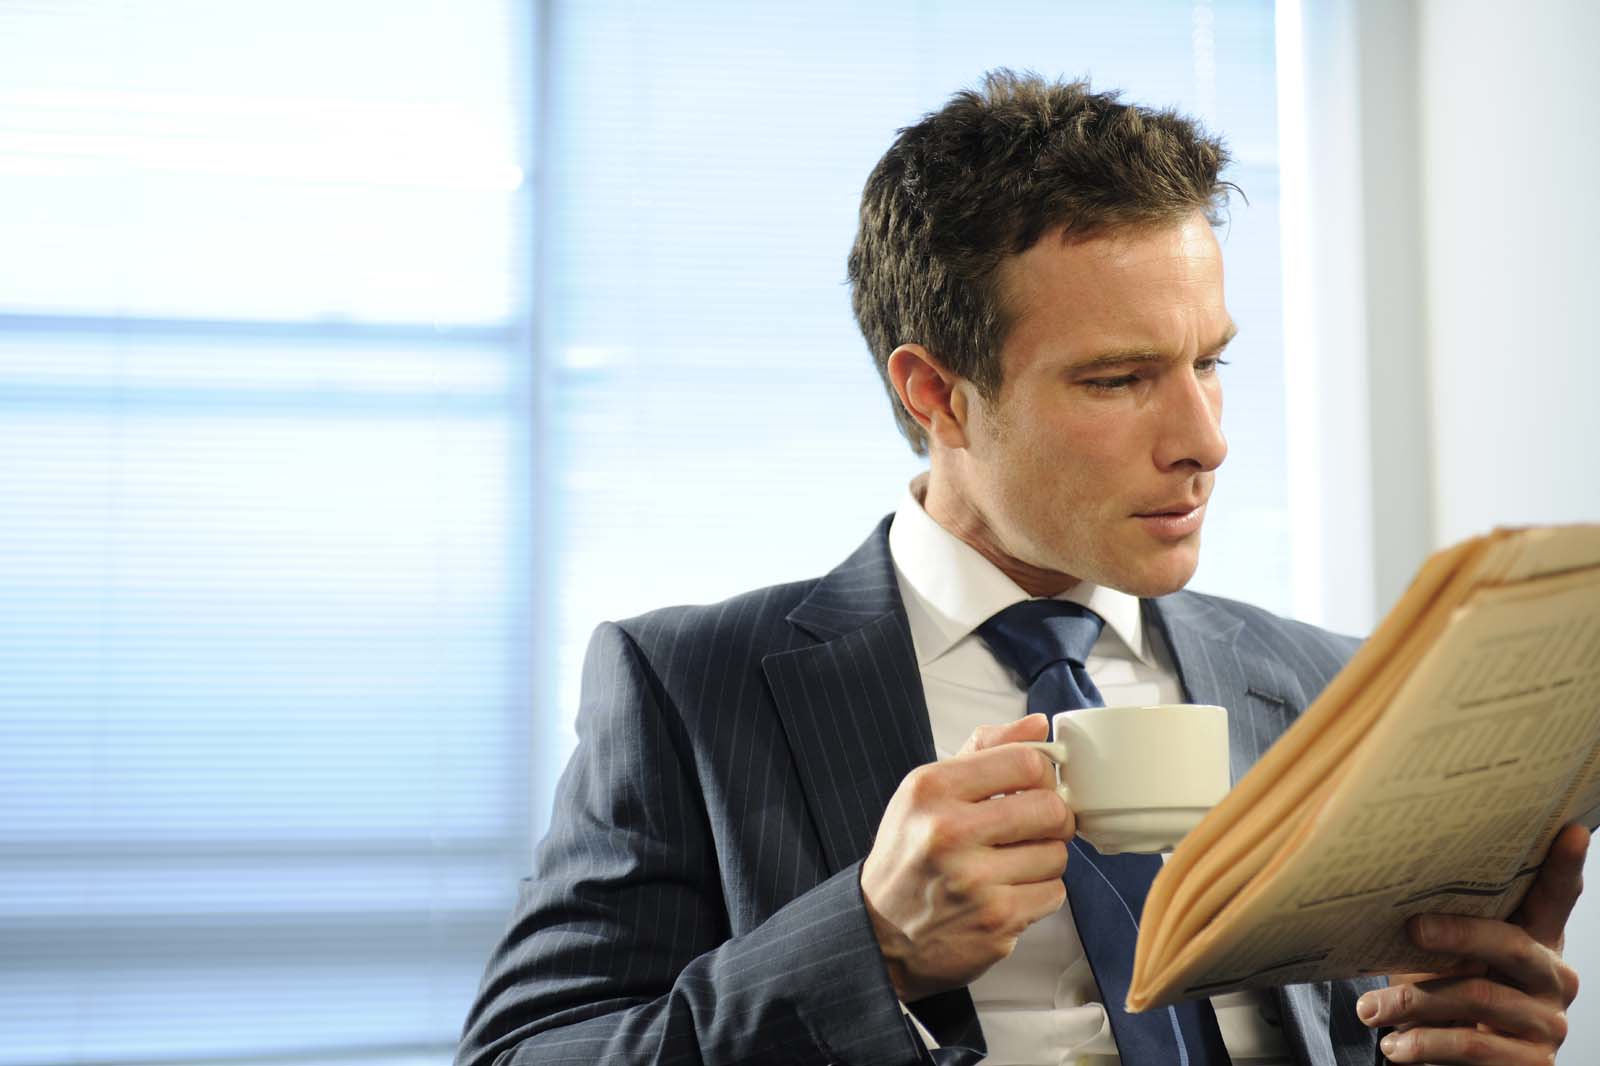 person drinking coffee in an office setting while looking at documents